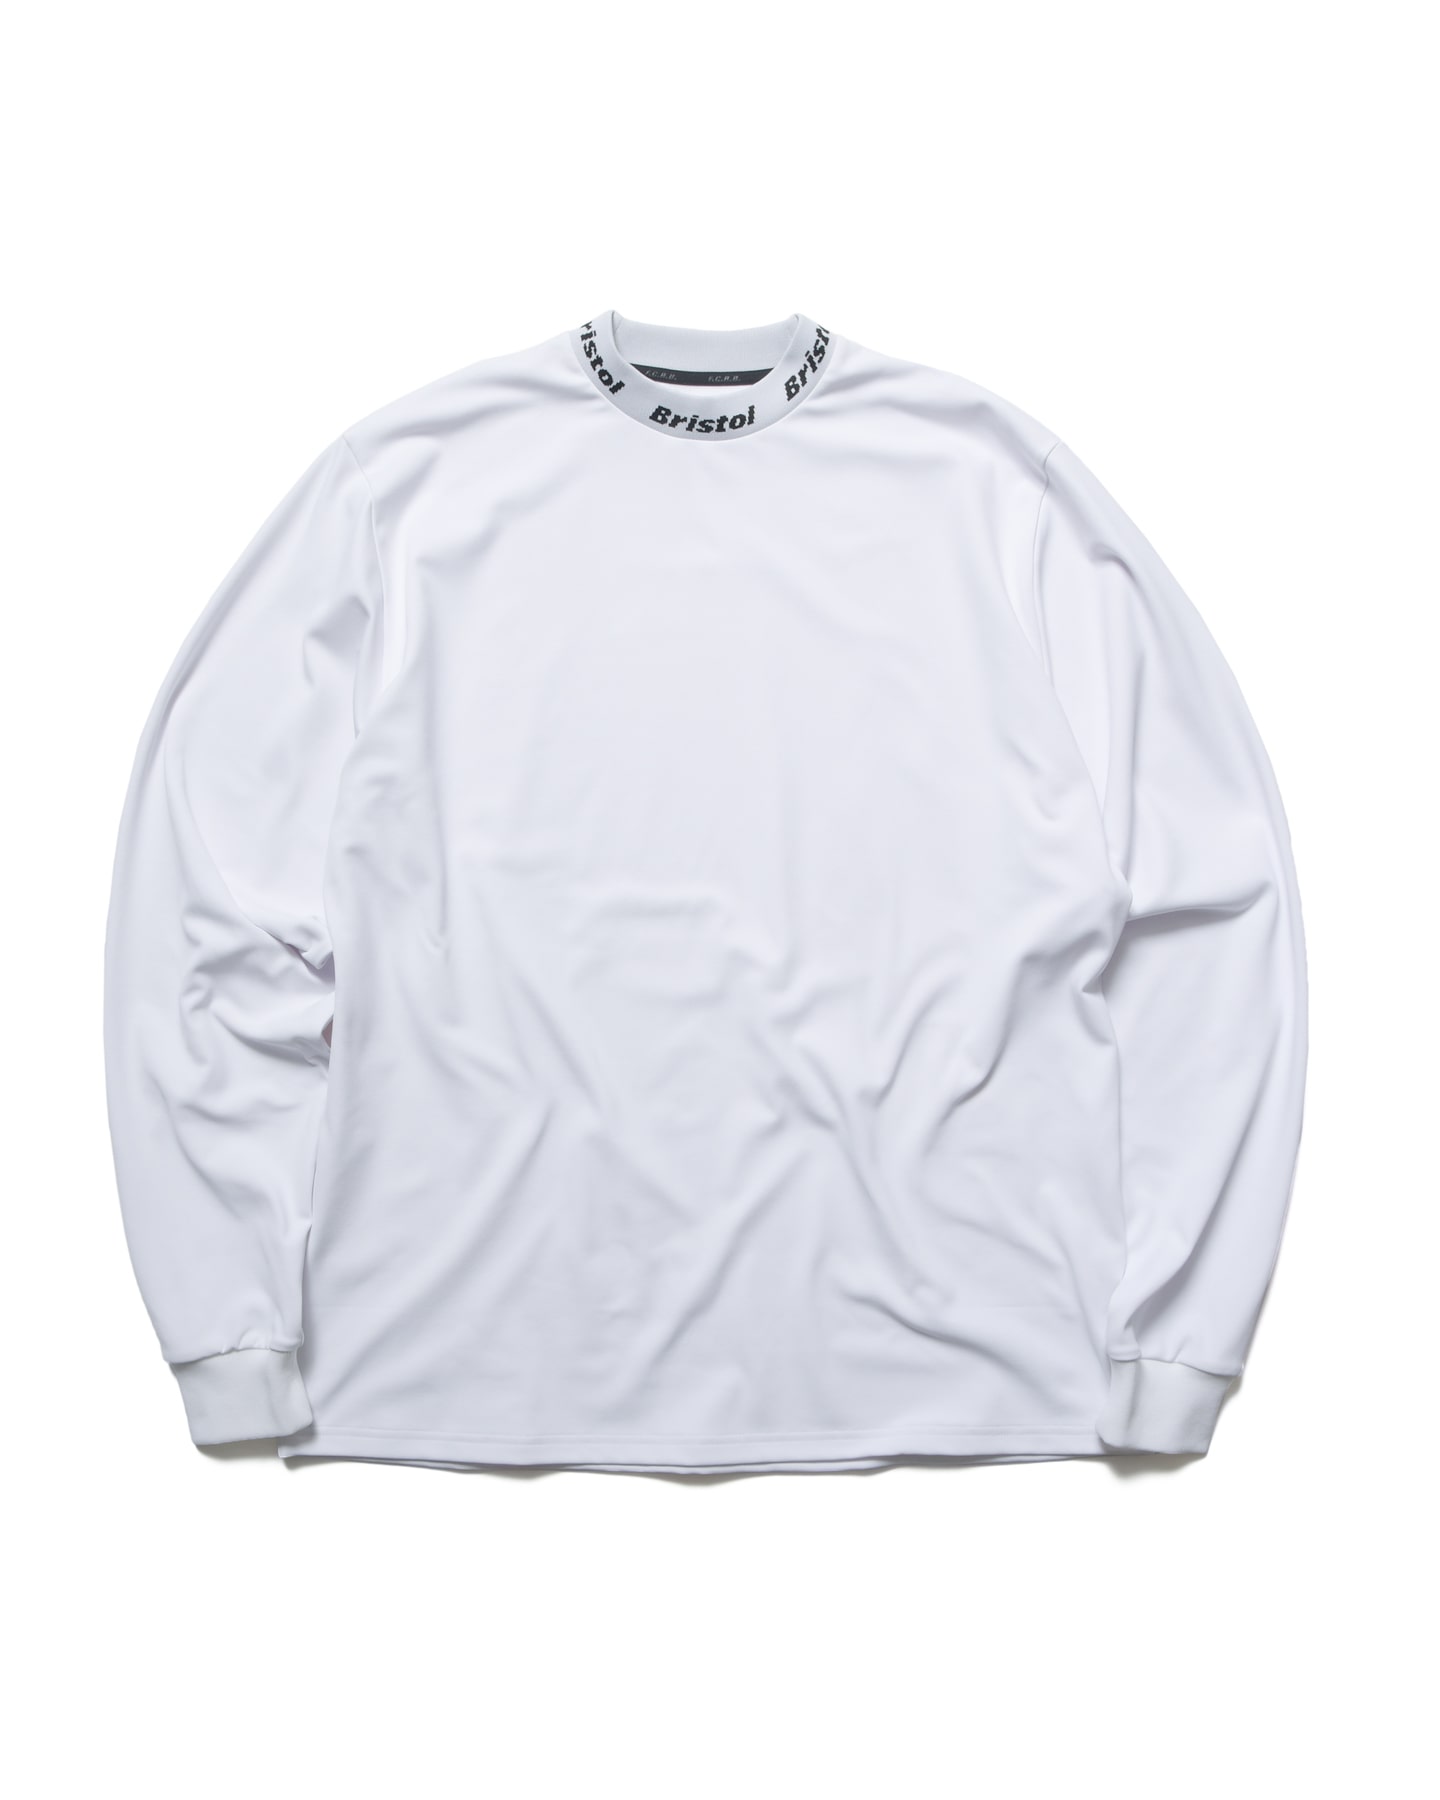 SOPH. | WINDPROOF NECK LOGO L/S BAGGY TOP(S WHITE):